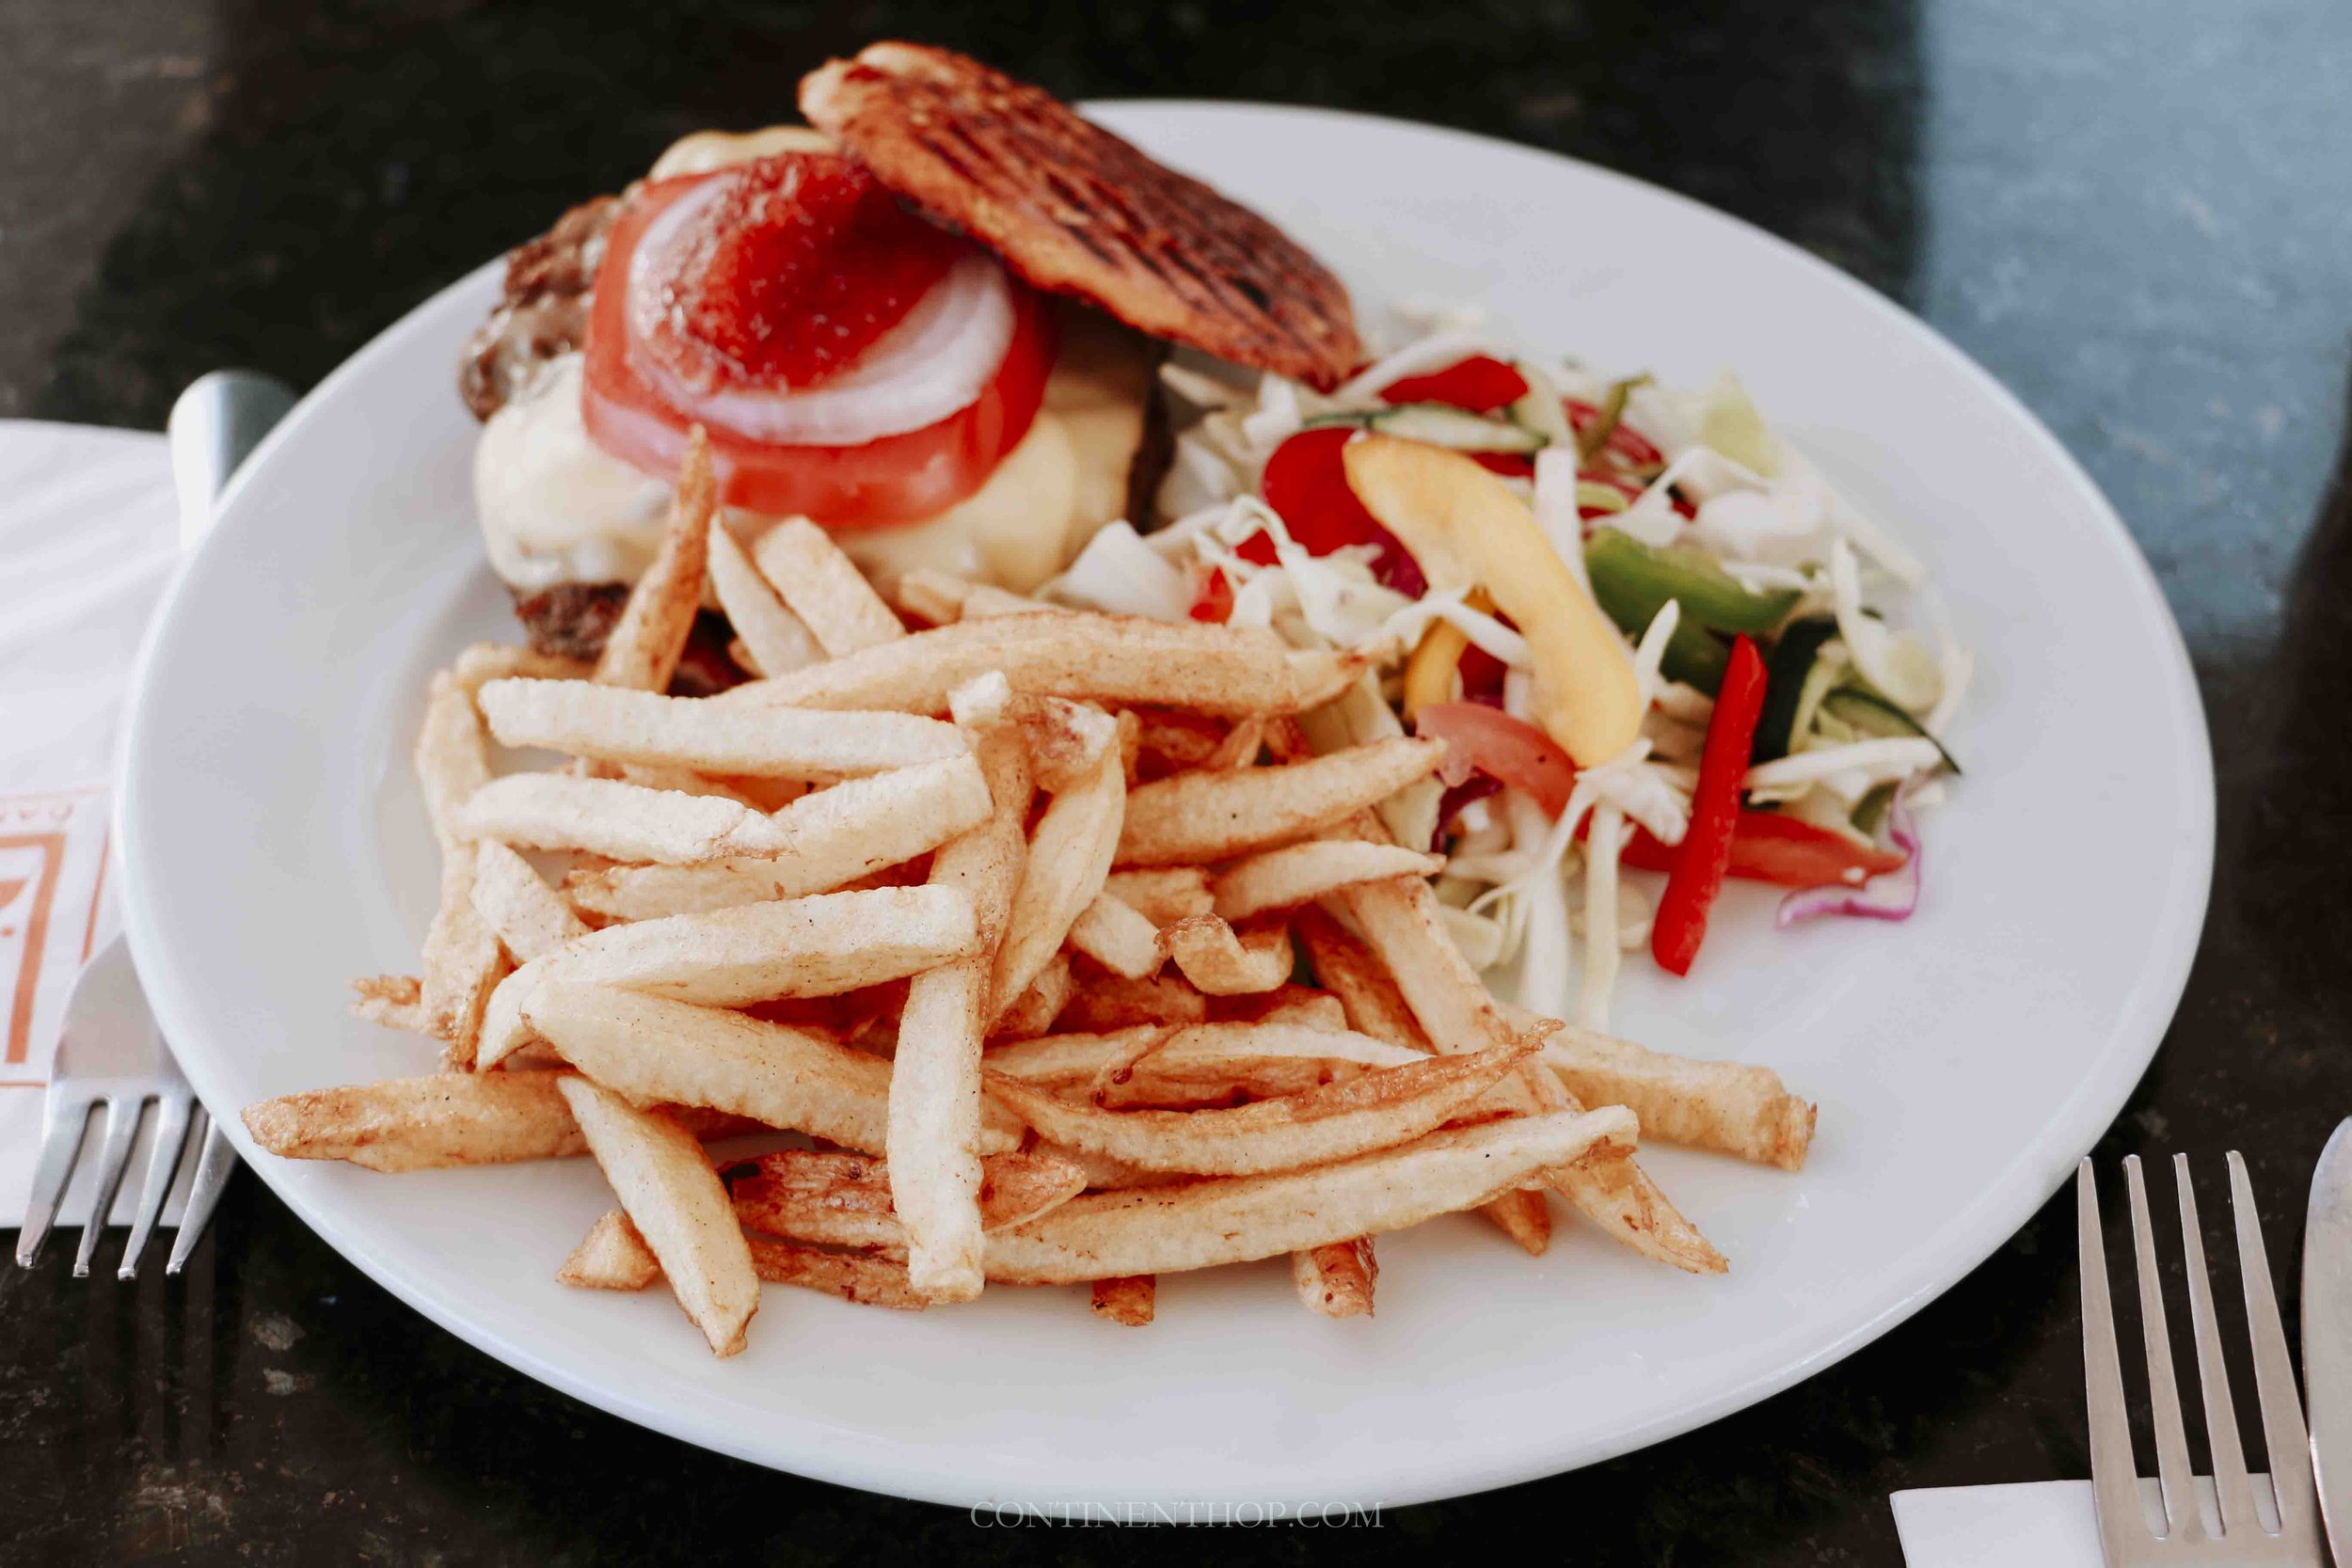 Traditional foods from Morocco camel burger with chips